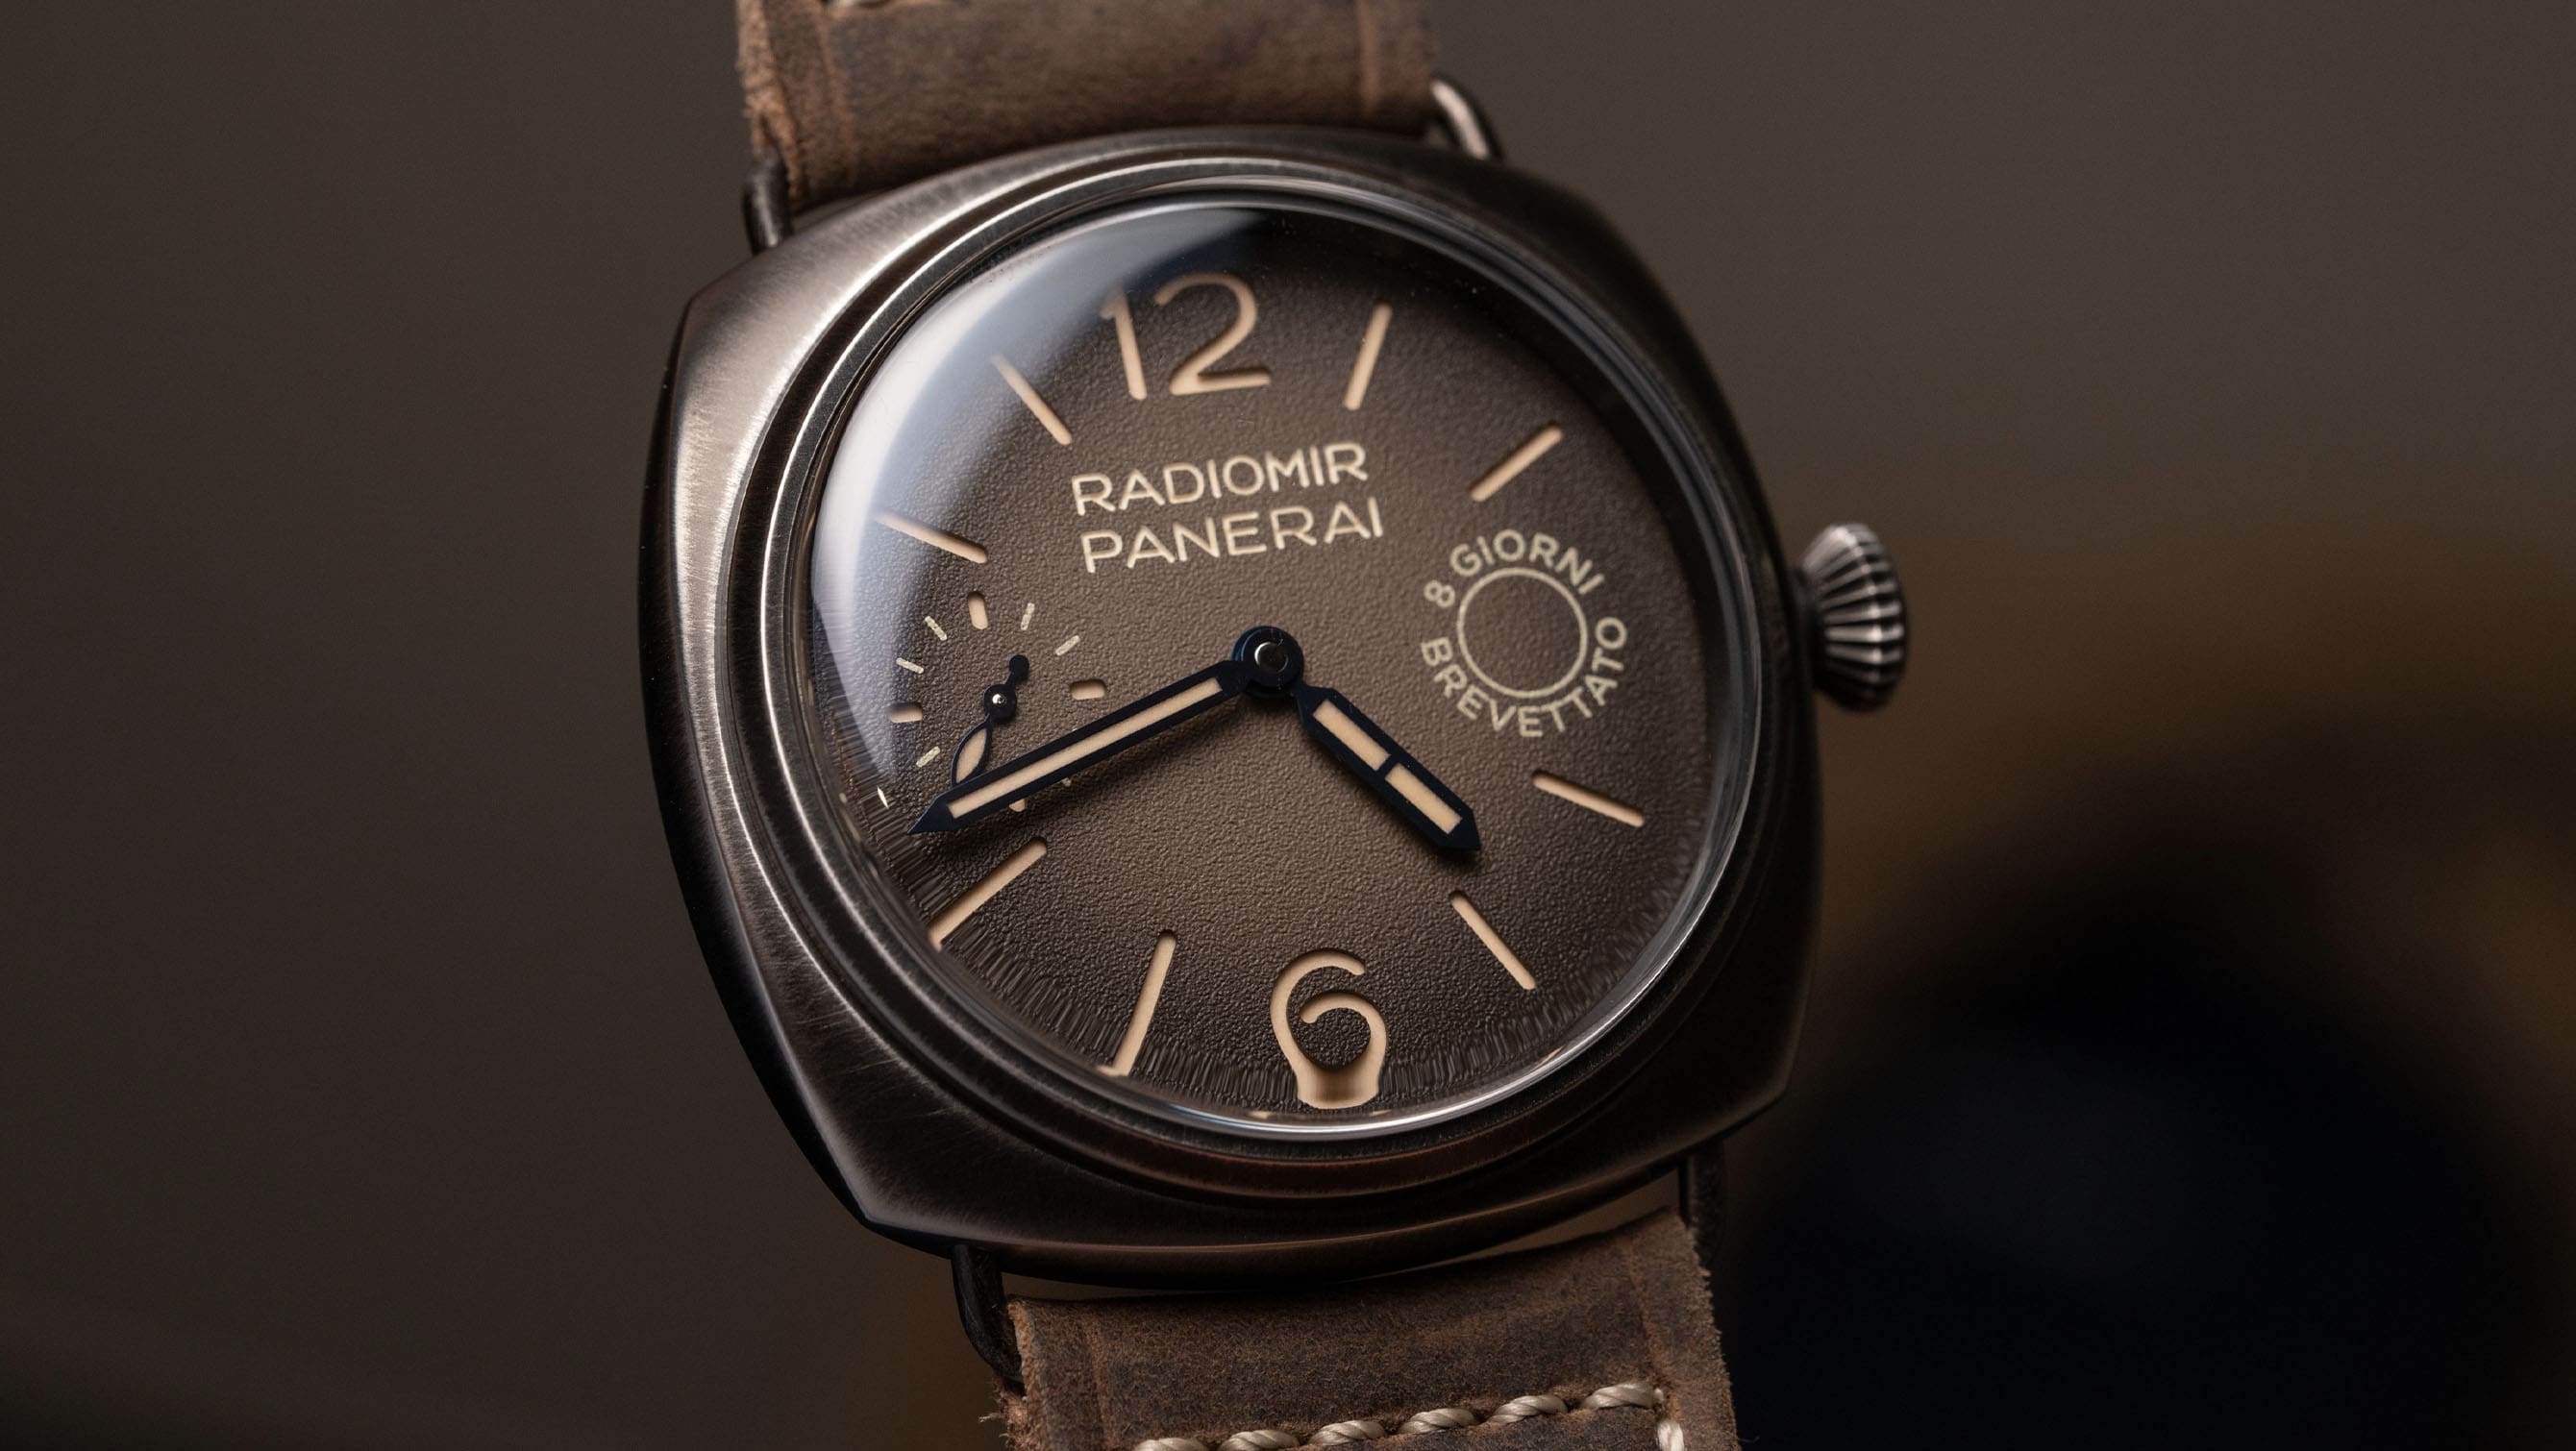 HANDS-ON: The Panerai Radiomir Otto Giorni brings a new case finish to the collection